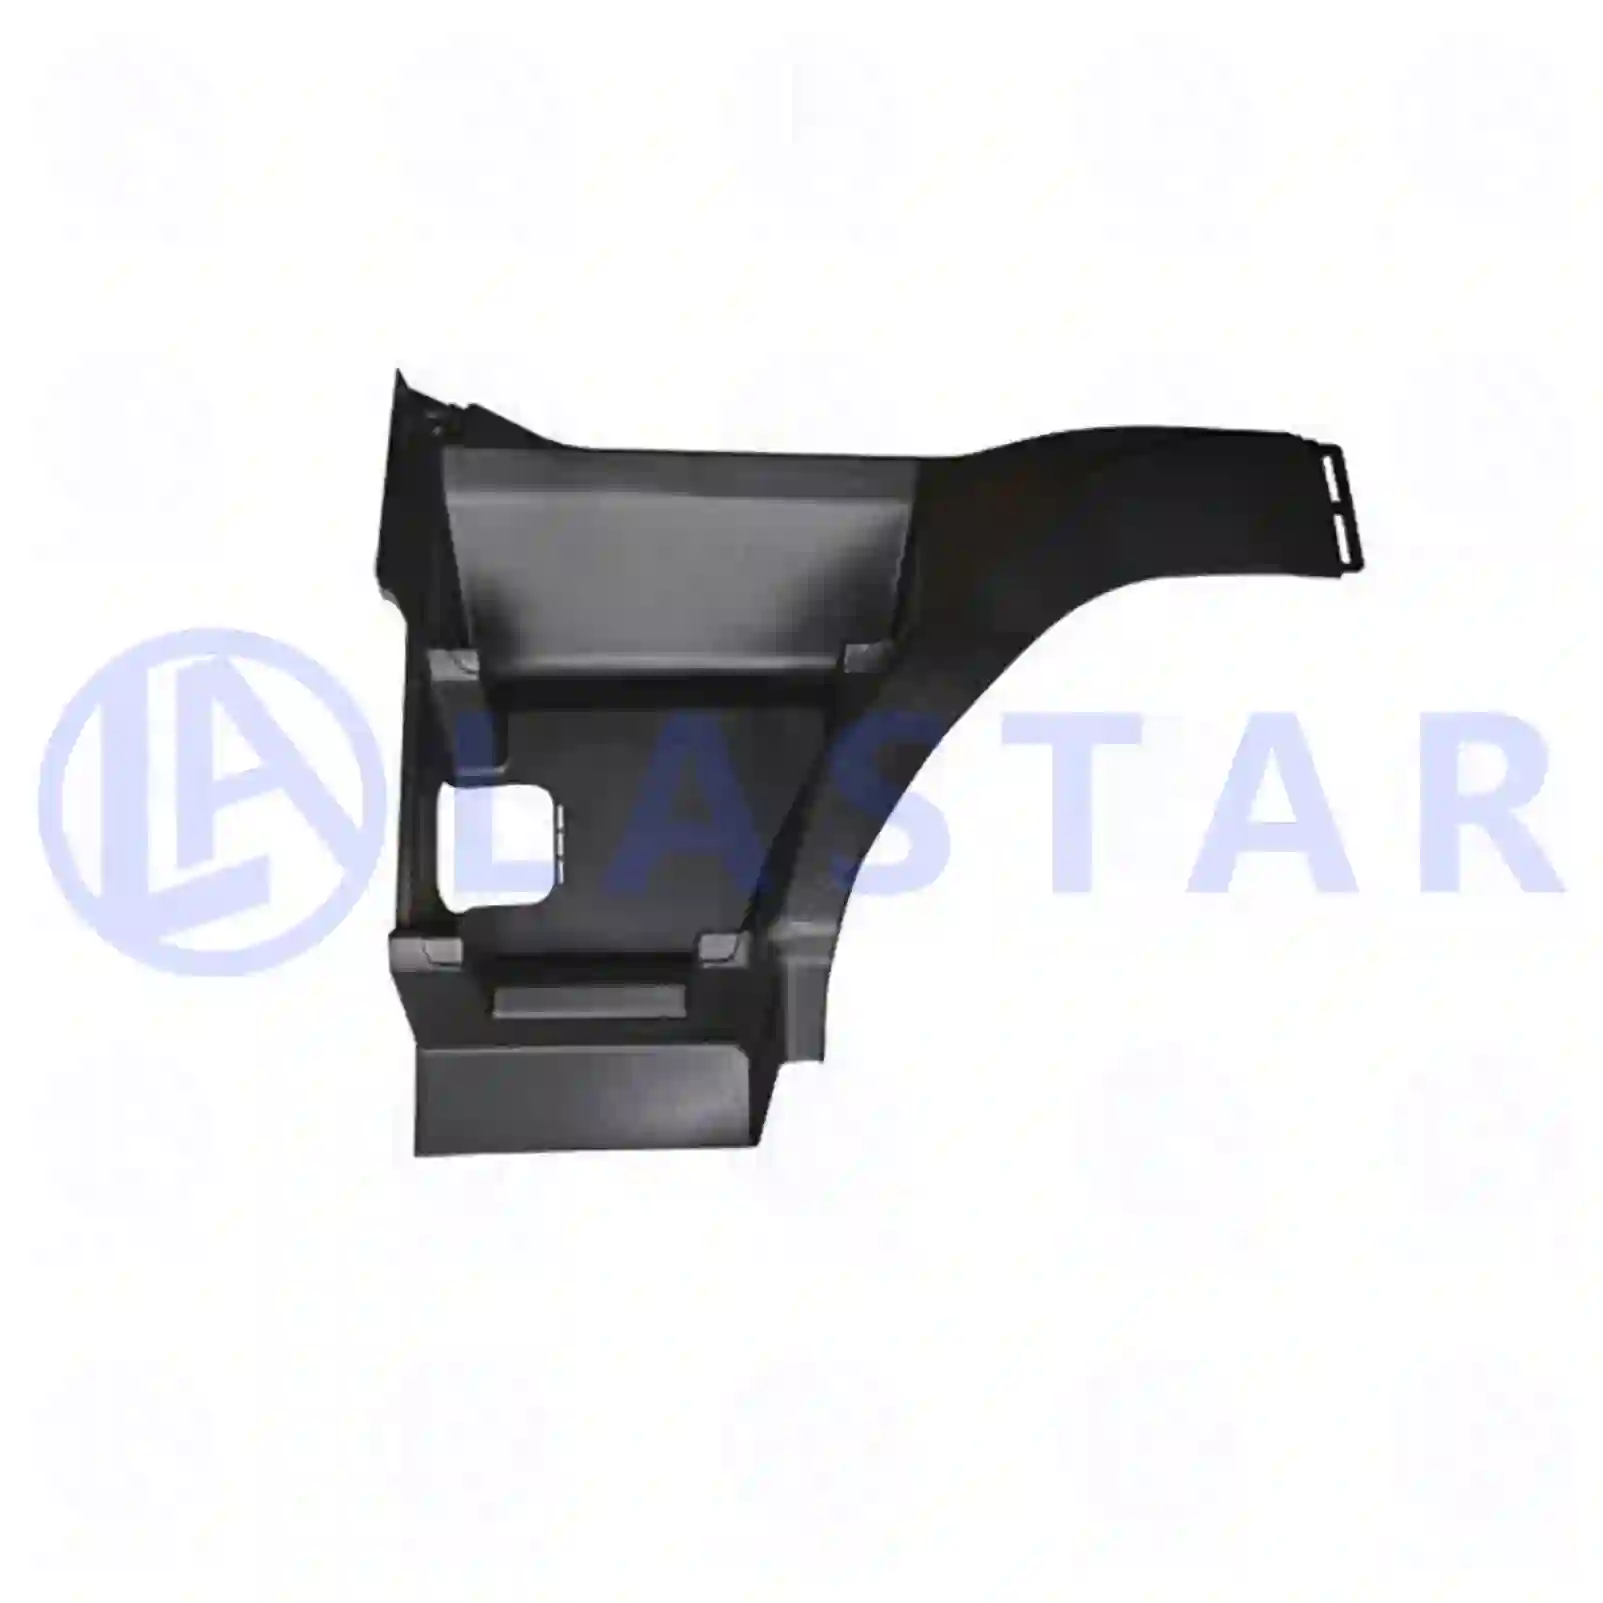 Step well case, left, 77721028, 3175246, 3981762, 8144107, 8189195, 8189300 ||  77721028 Lastar Spare Part | Truck Spare Parts, Auotomotive Spare Parts Step well case, left, 77721028, 3175246, 3981762, 8144107, 8189195, 8189300 ||  77721028 Lastar Spare Part | Truck Spare Parts, Auotomotive Spare Parts